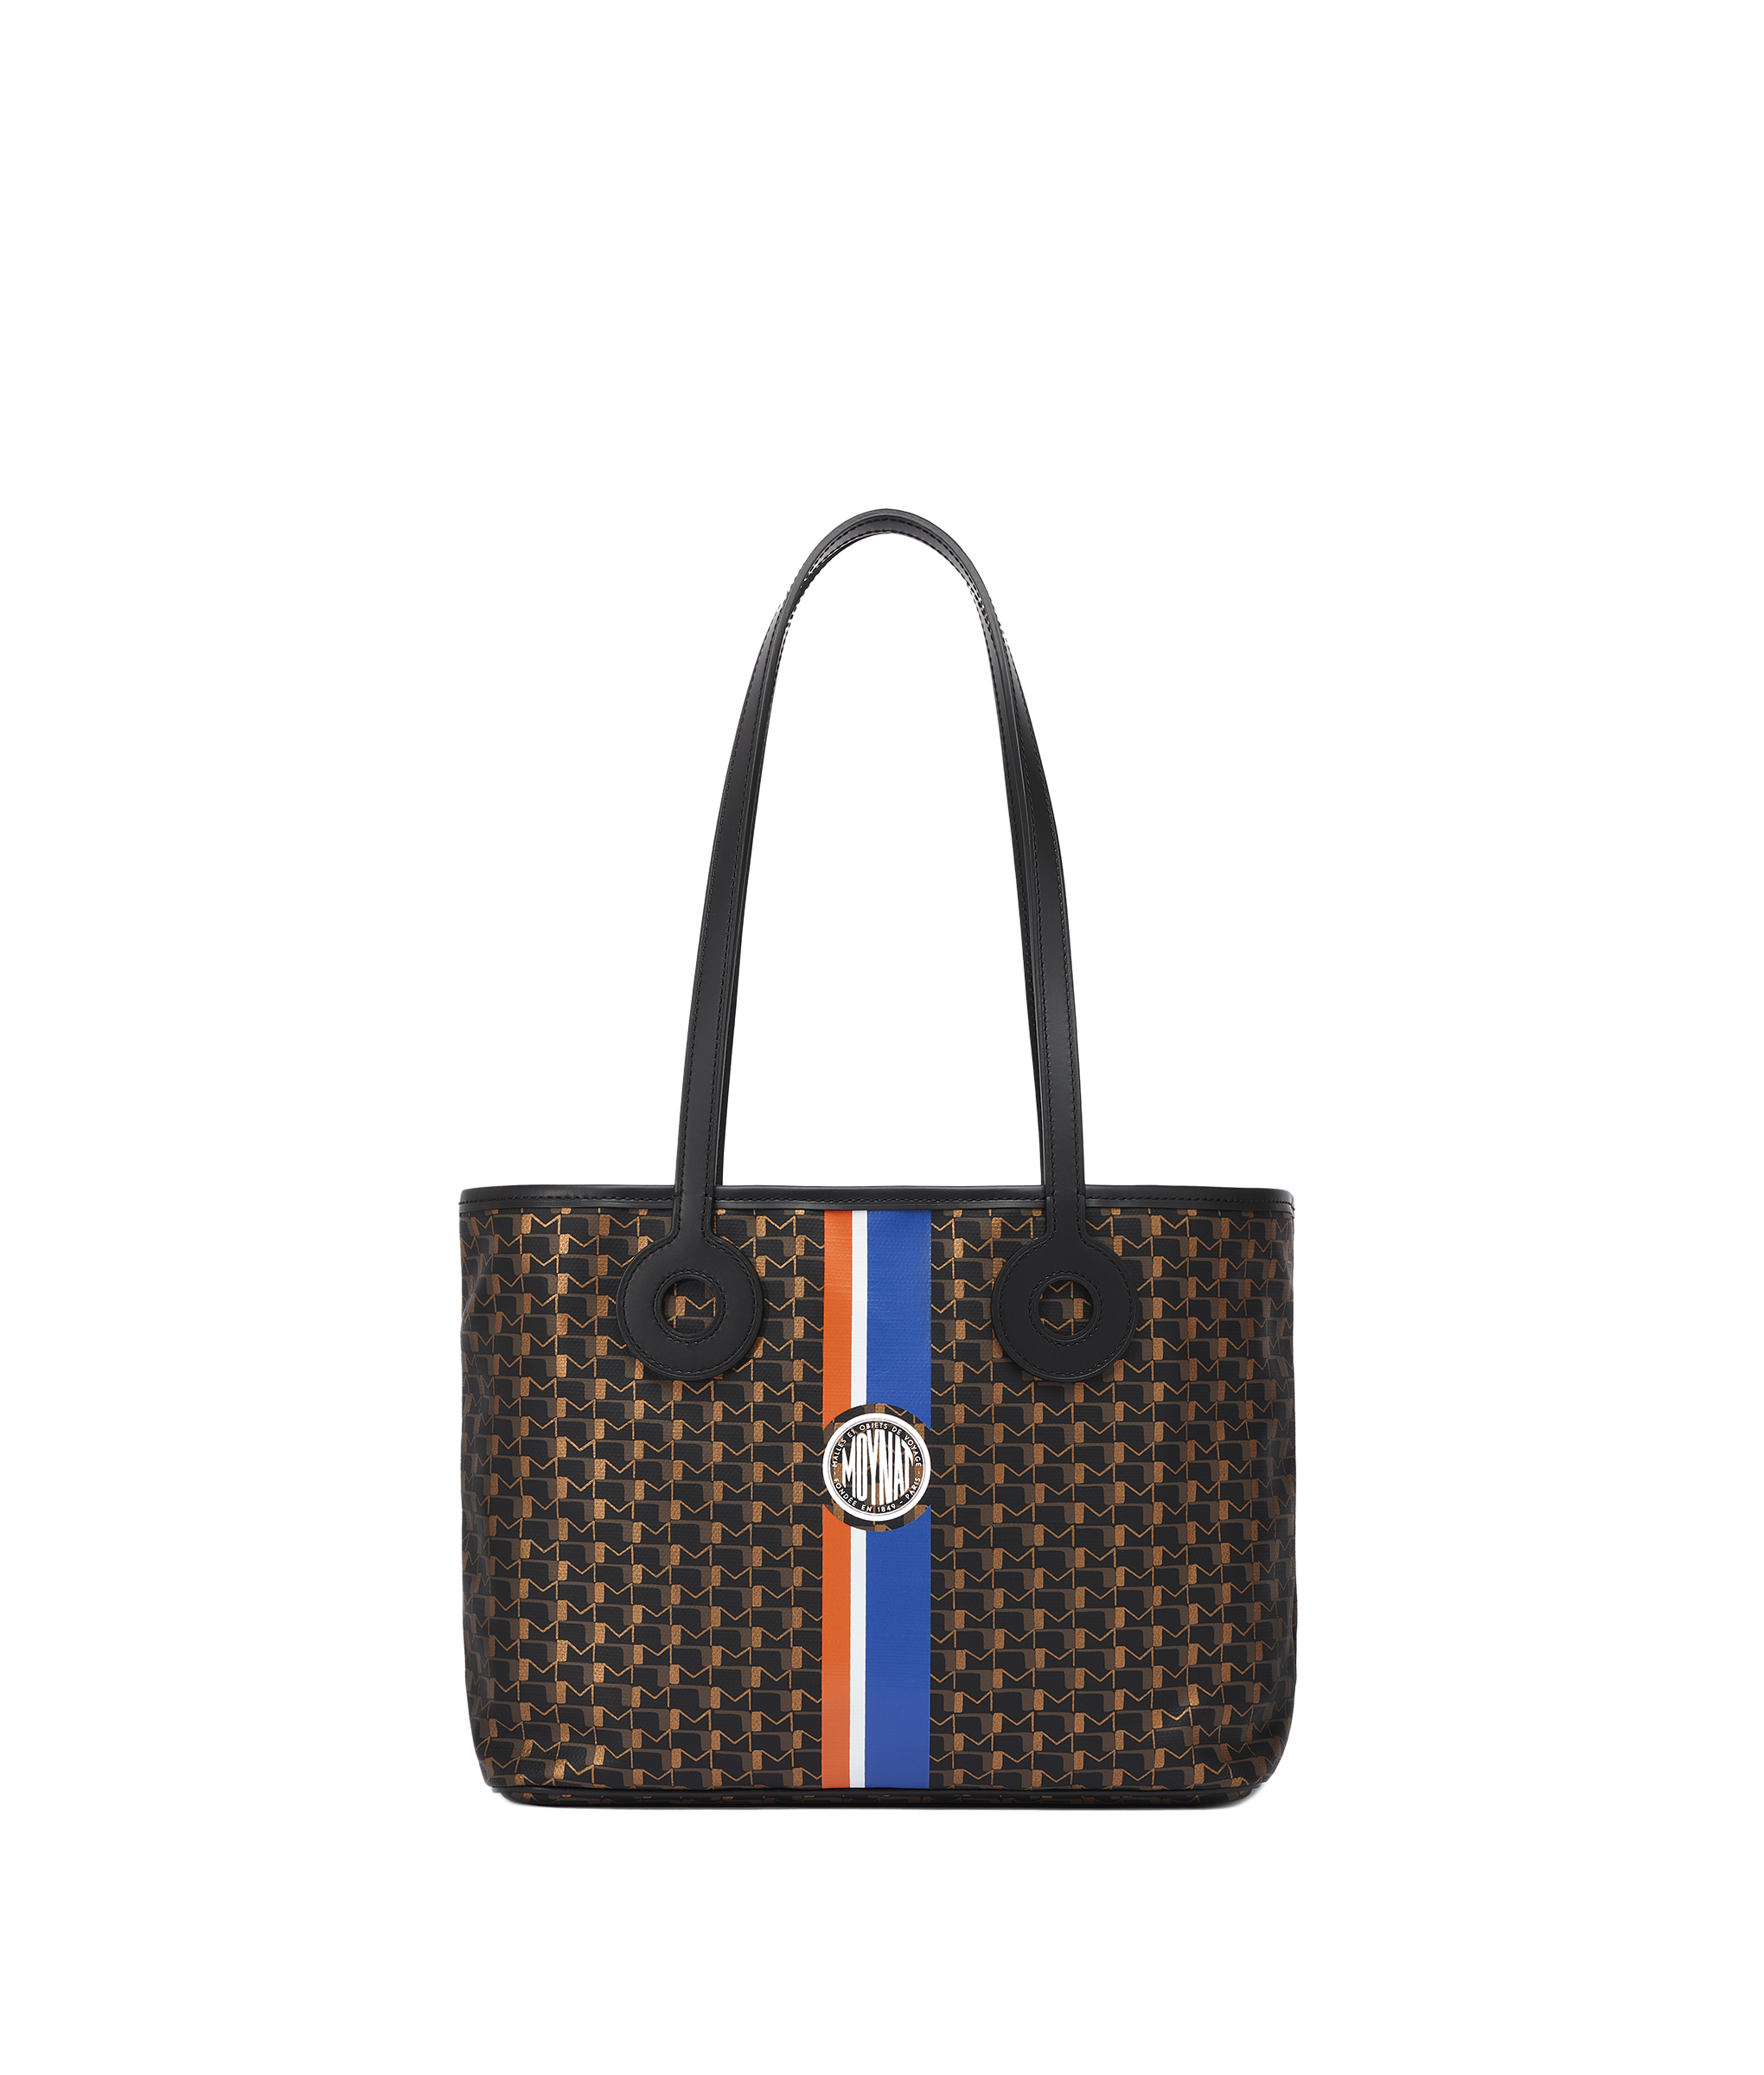 OH TOTE TOILE MOYNAT 1920 LIMITED EDITION ! ULTRA LUXURY DESIGNER